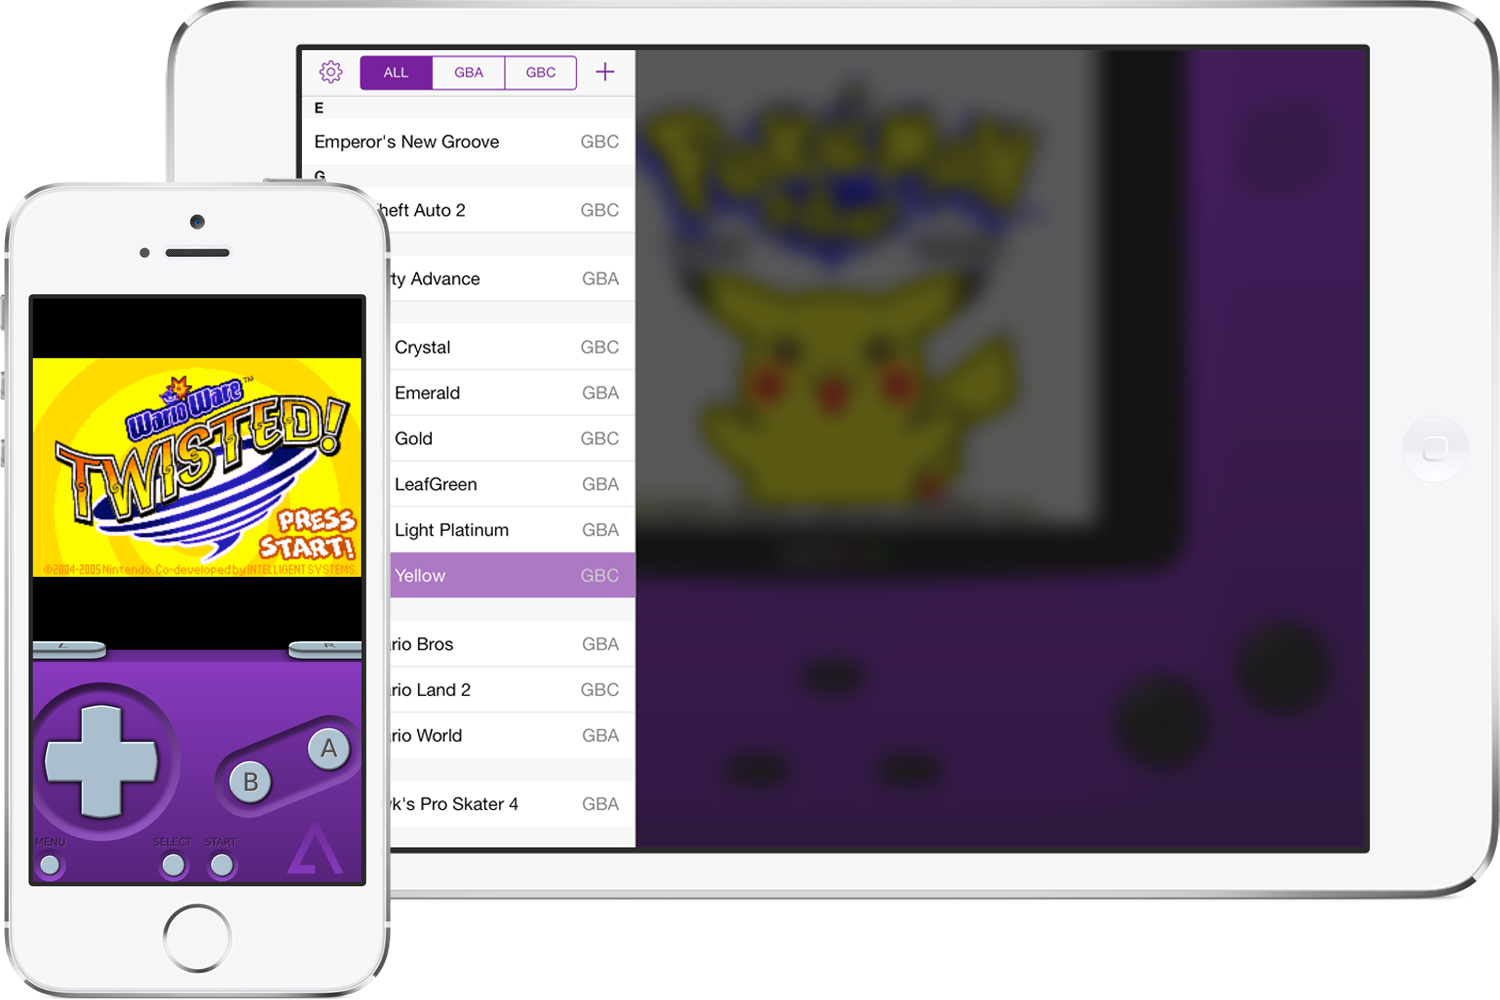 How To Install GBA Emulator & Games FREE On iOS 7.1, 7.0.4 & Below